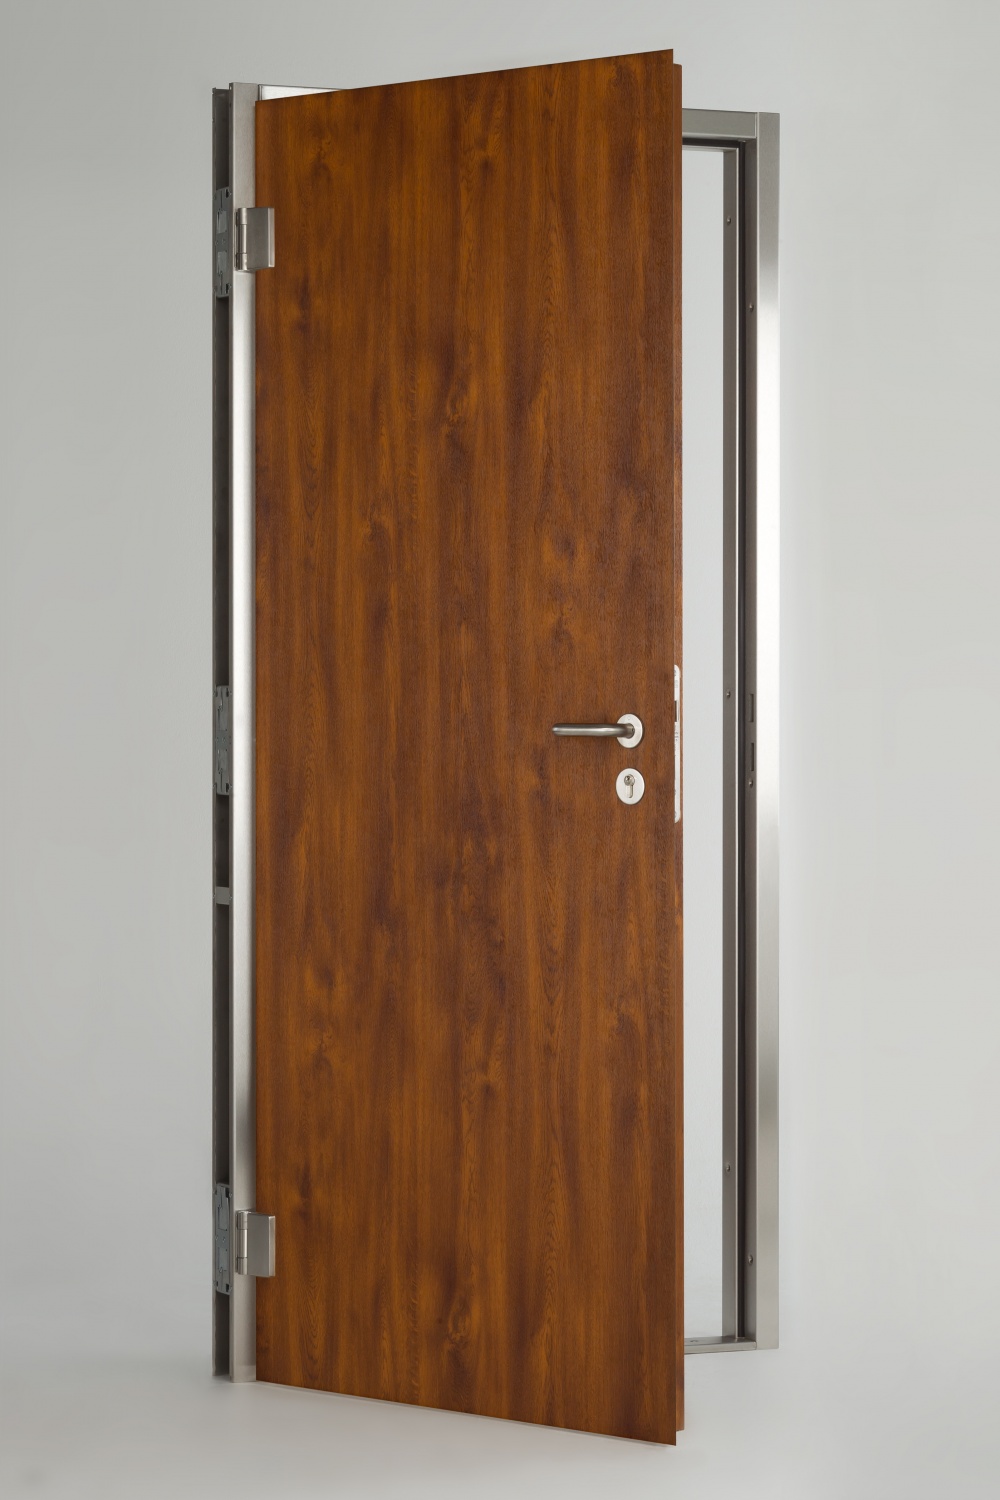 WE15 Steel doorset with the appearance of timber.